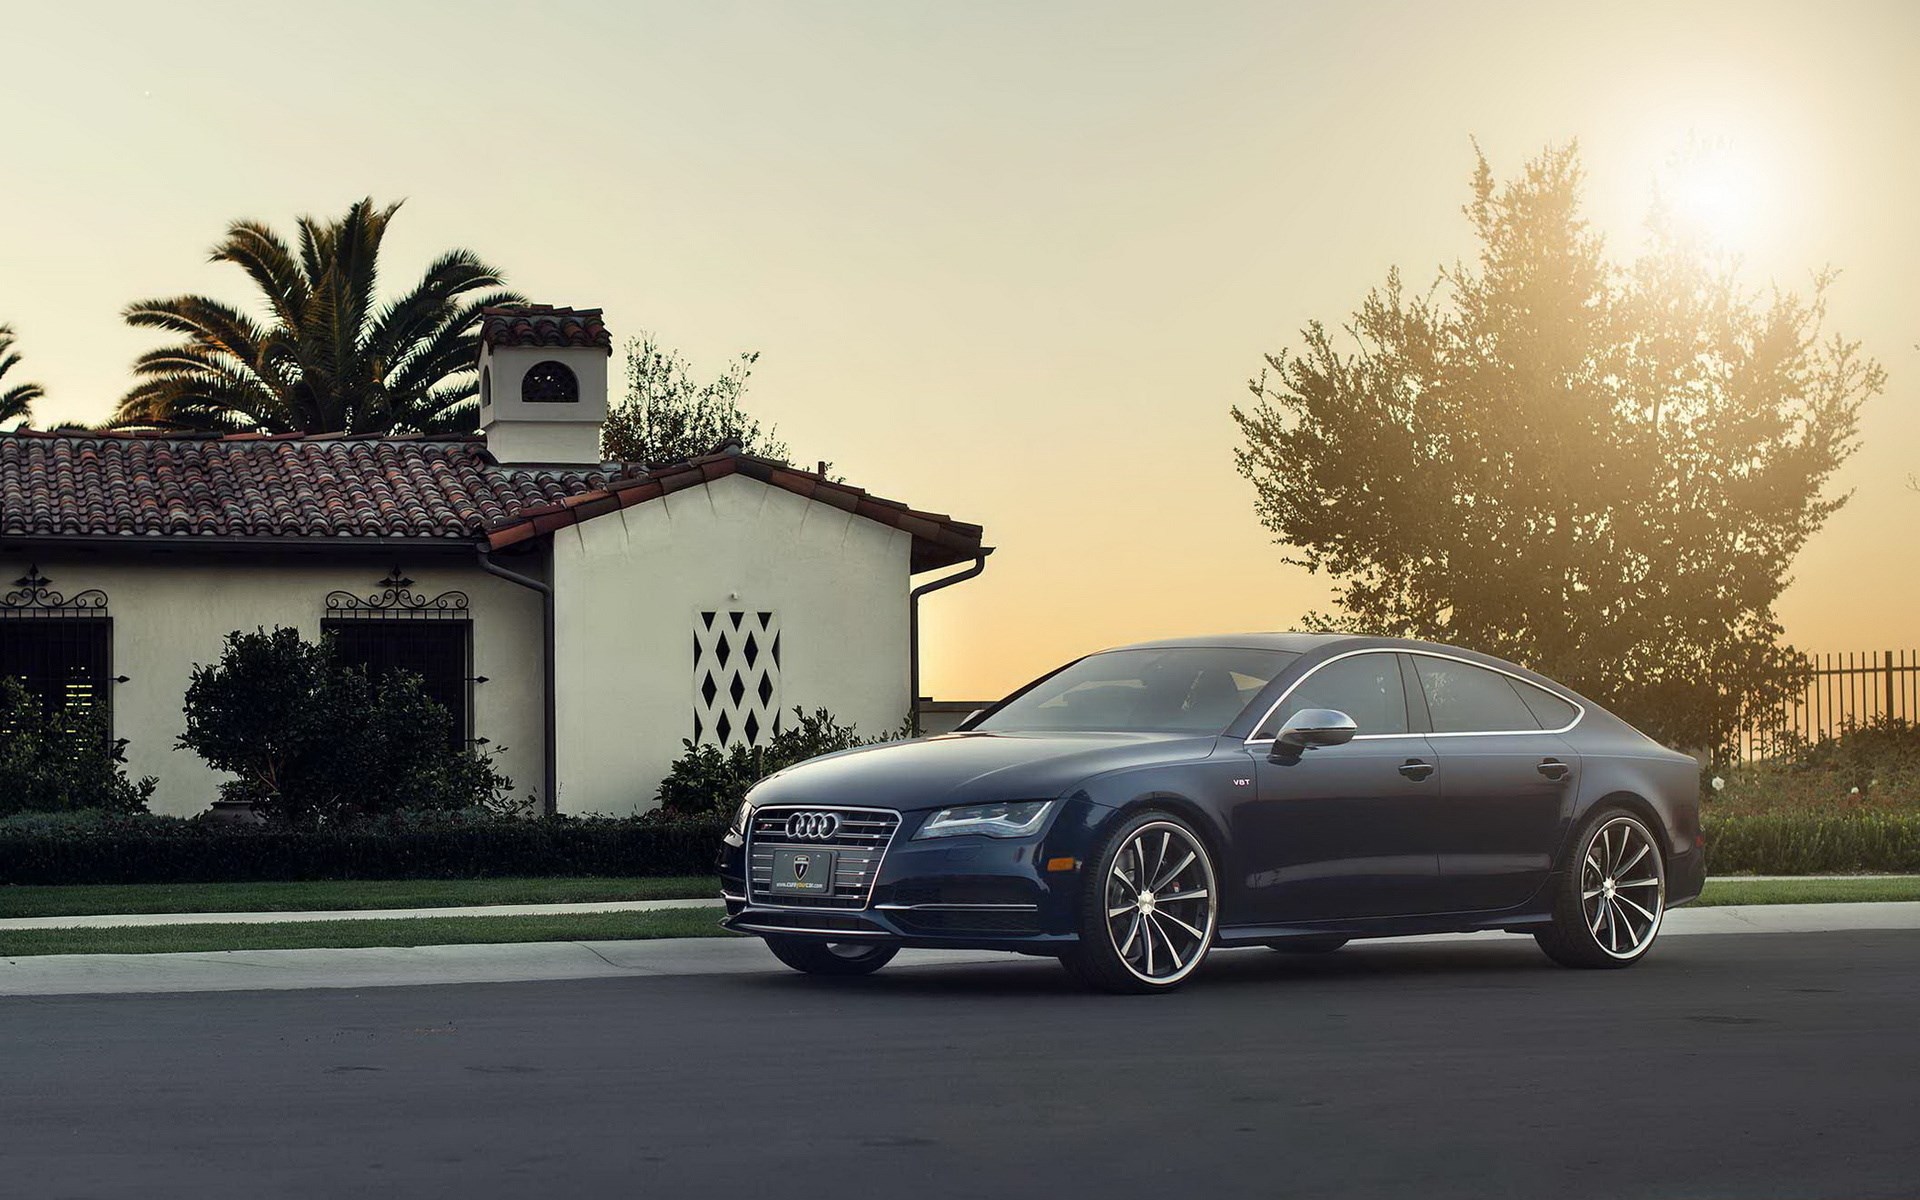 Audi S7 Wallpaper - Audi S7 Wallpaper Hd , HD Wallpaper & Backgrounds